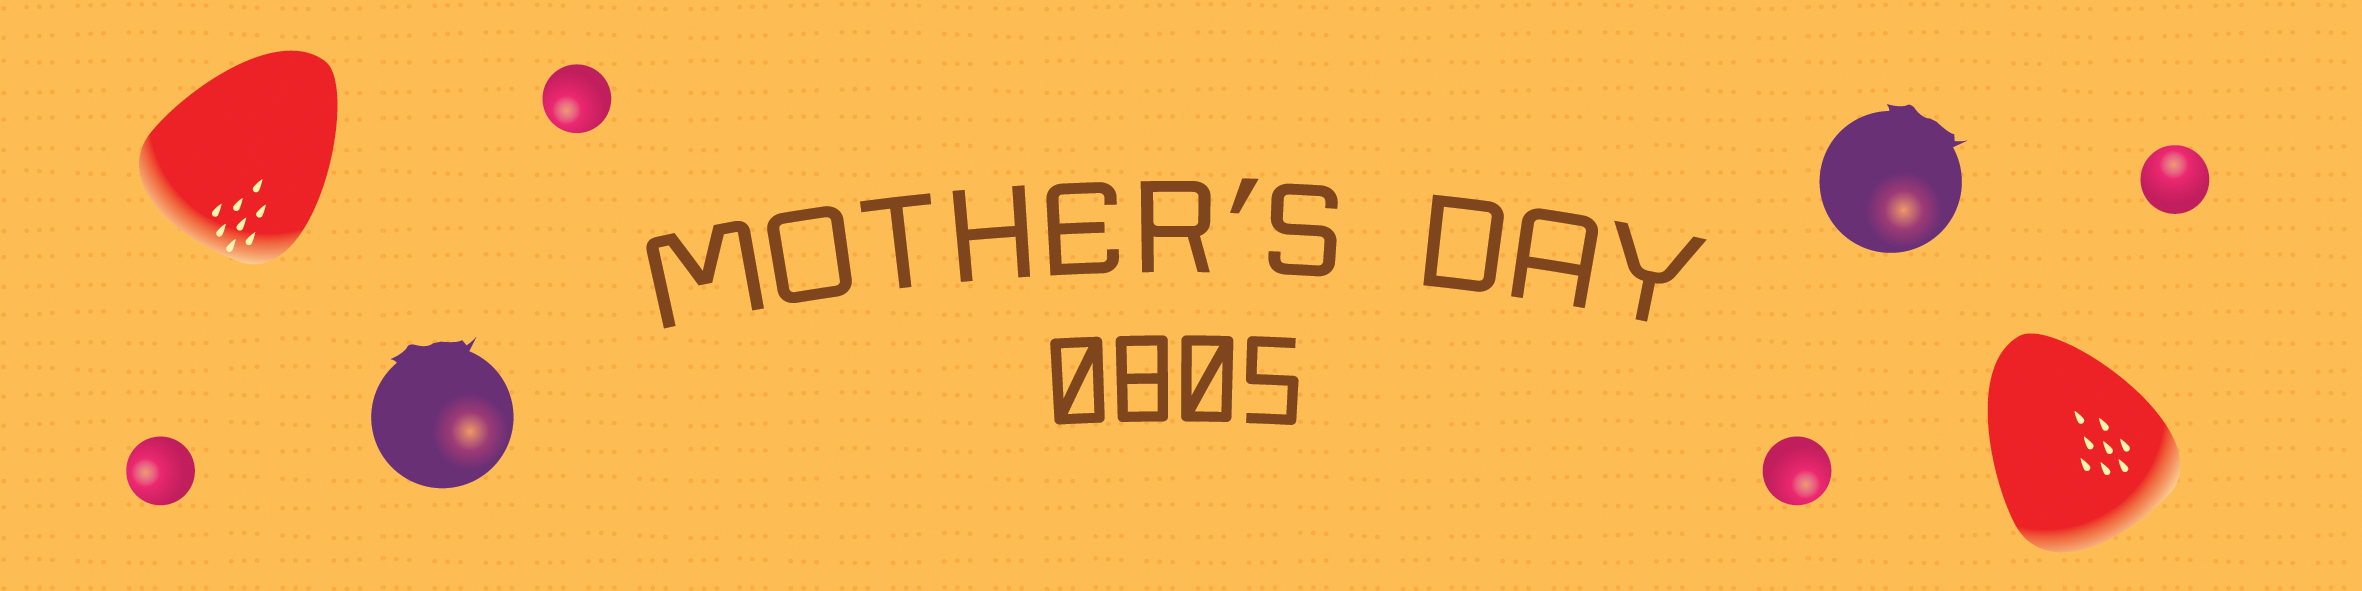 MOTHER'S DAY 2016 TITLE